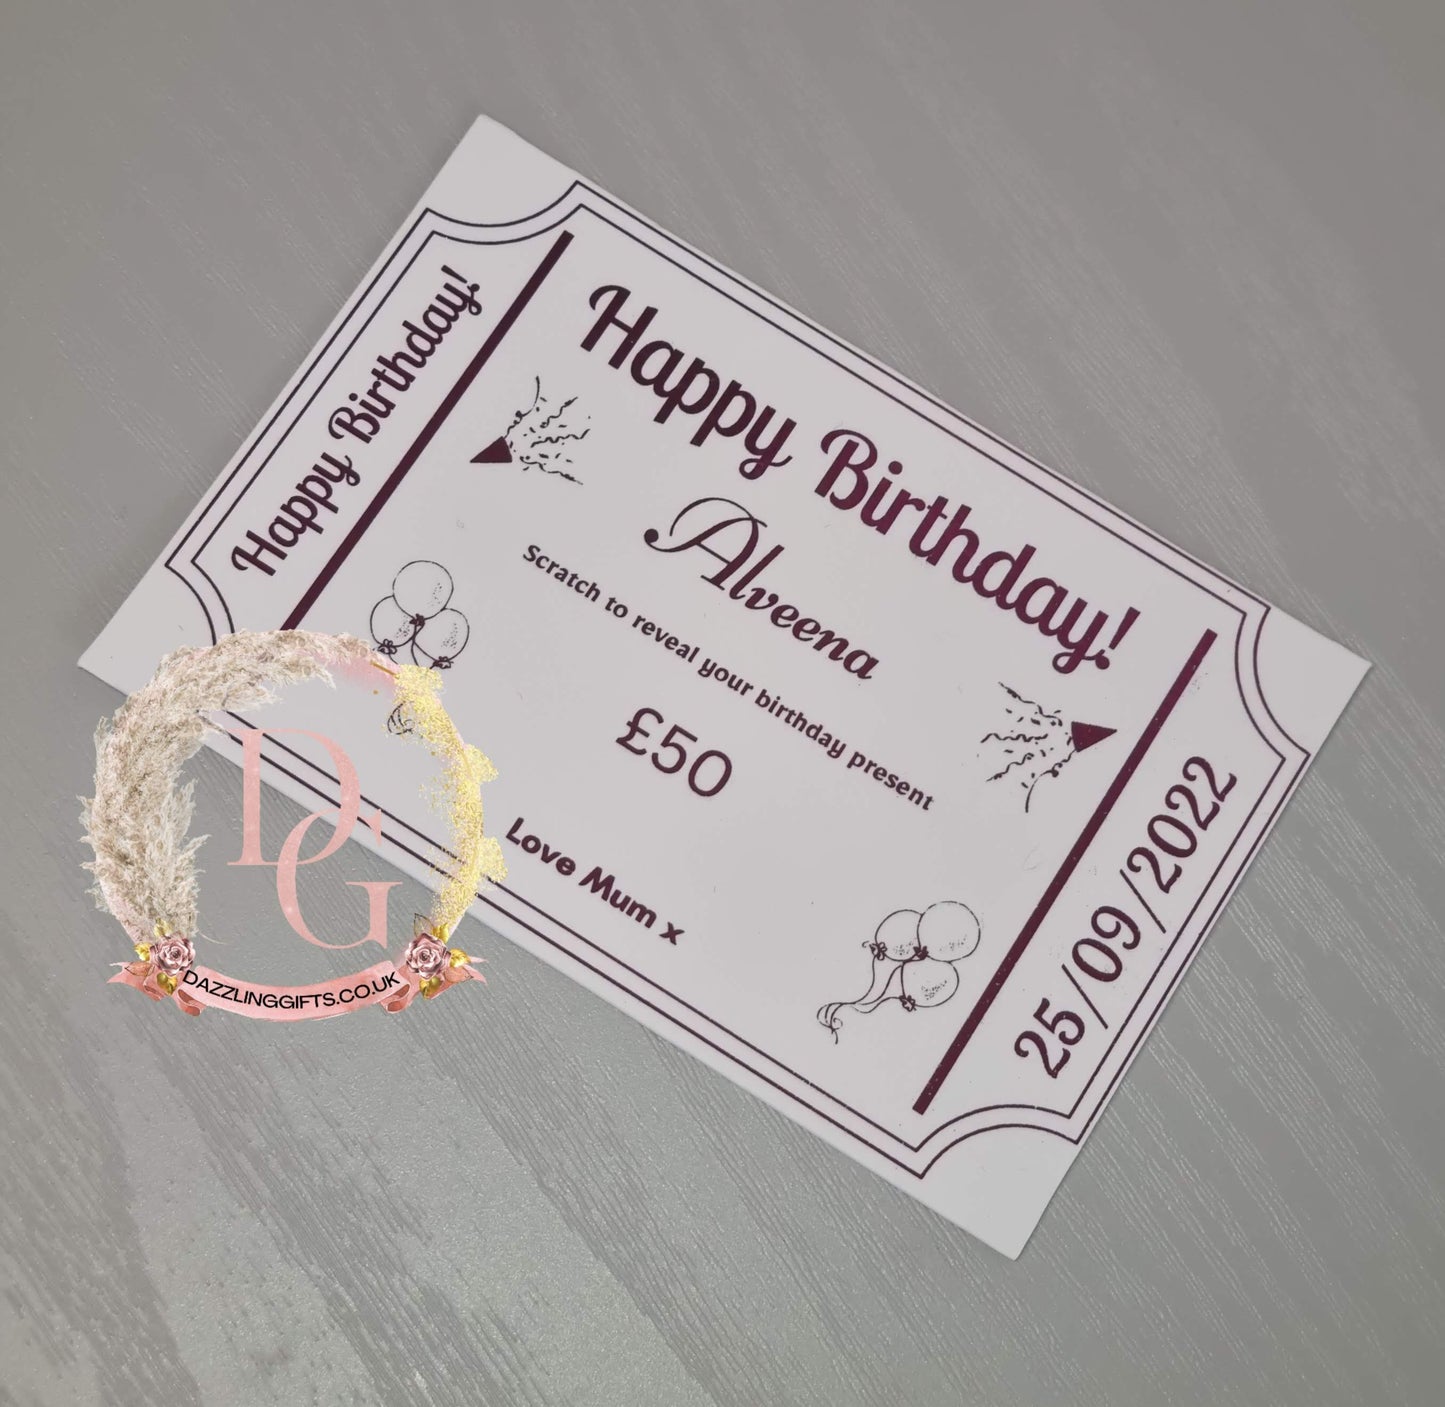 Personalised scratch and reveal card!